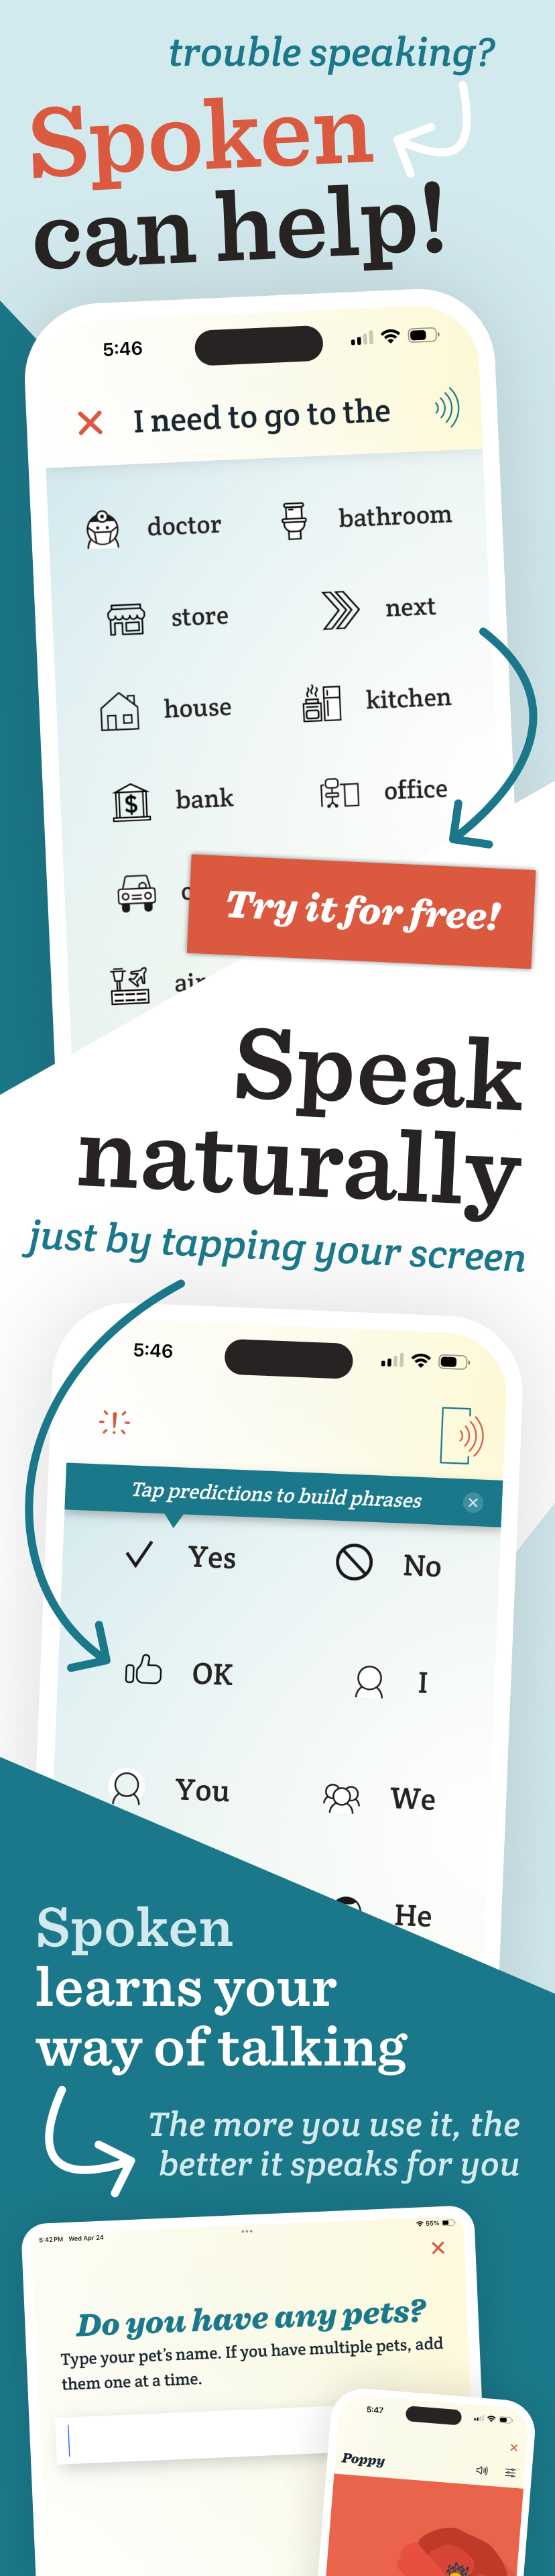 Trouble speaking? Spoken can help! Speak naturally! Just by tapping your screen. Spoken learns your way of talking.